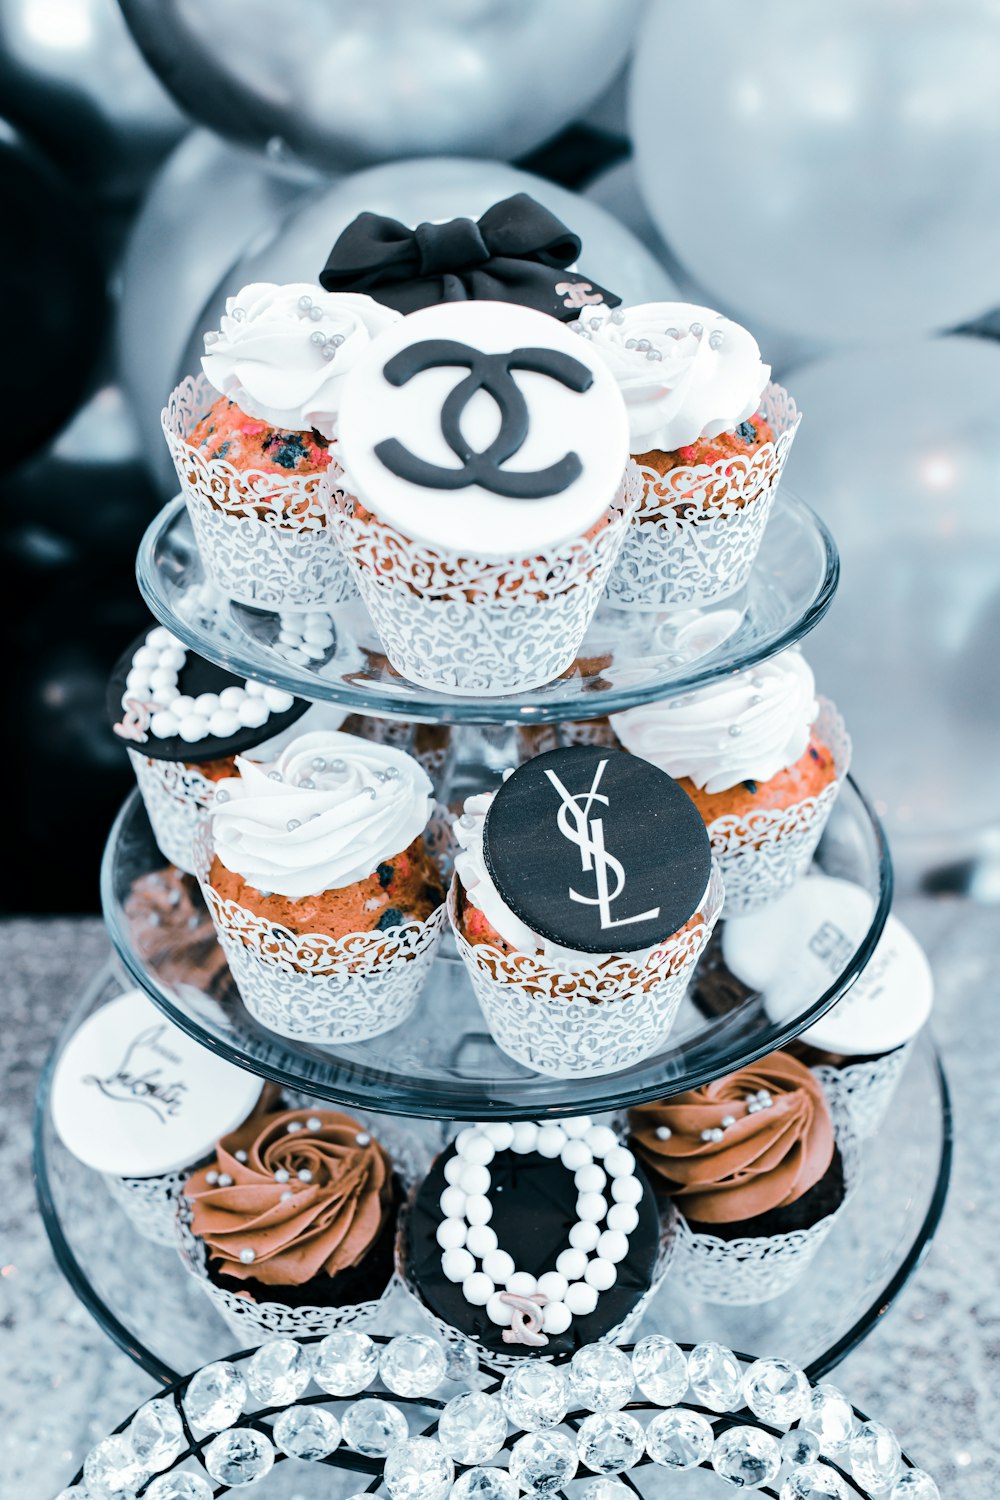 Coco Chanel Box Cake - Decorated Cake by Rosa - CakesDecor